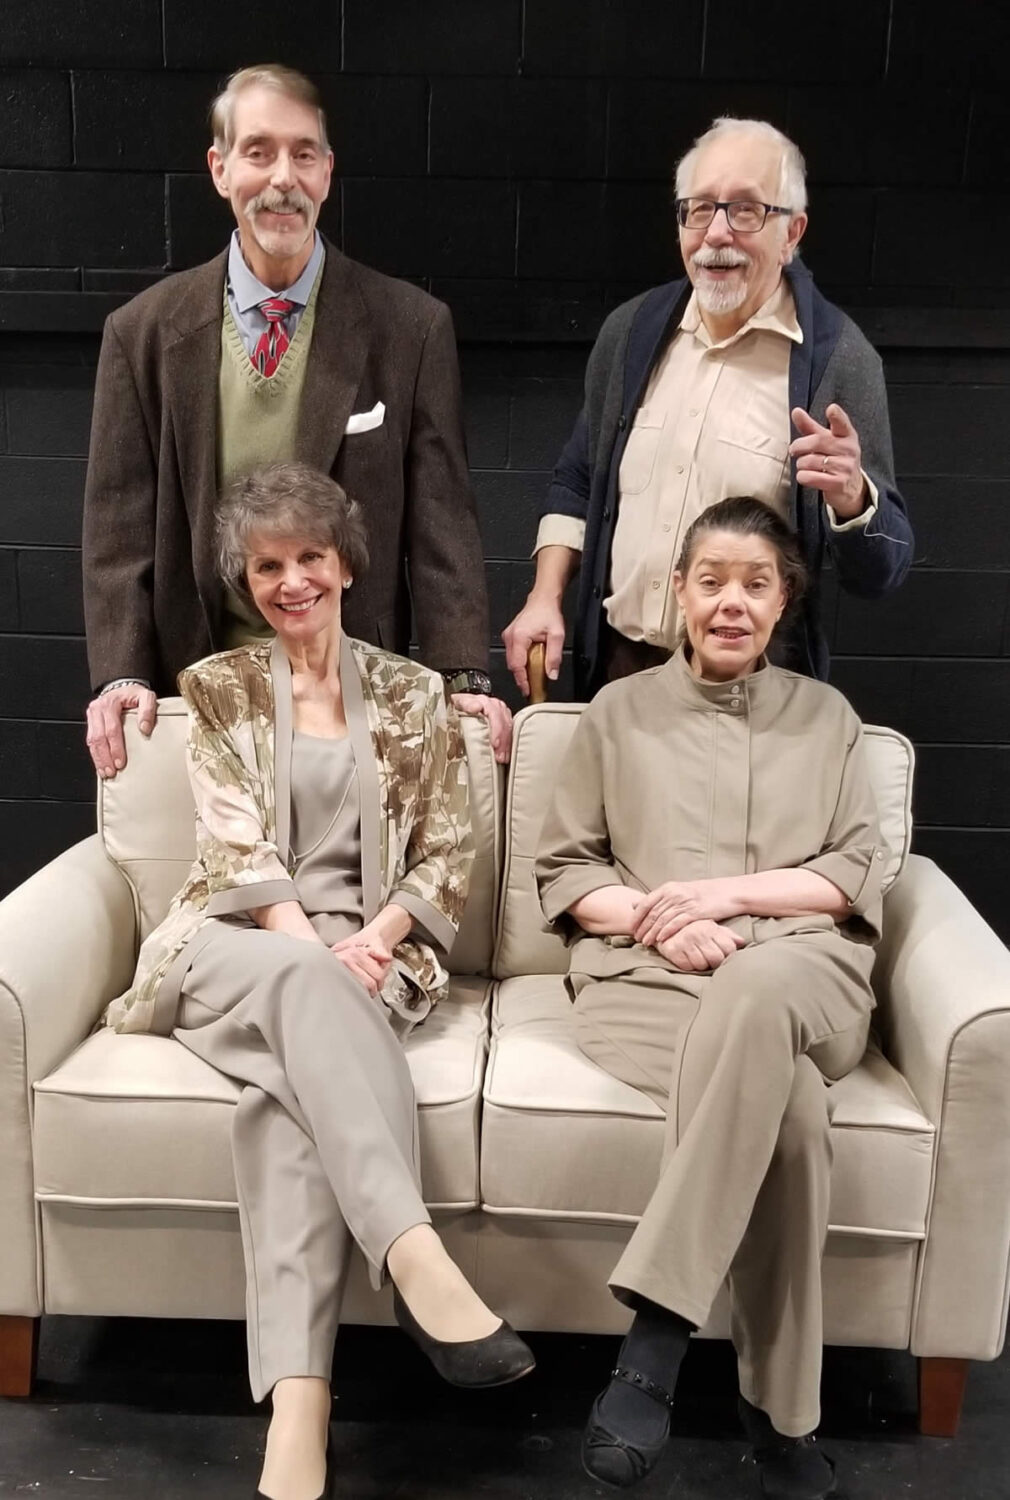 (L to R) Reggie (Mike Cabsinger) and Wilf (Ken Hawkley) stand behind (L to R) Jean (Liliana Mitchell) and Cissy (Alicia Cuccia) in this group photo of the cast of Quartet. The comedy Quartet runs at The Drama Group from April 12 to 21.